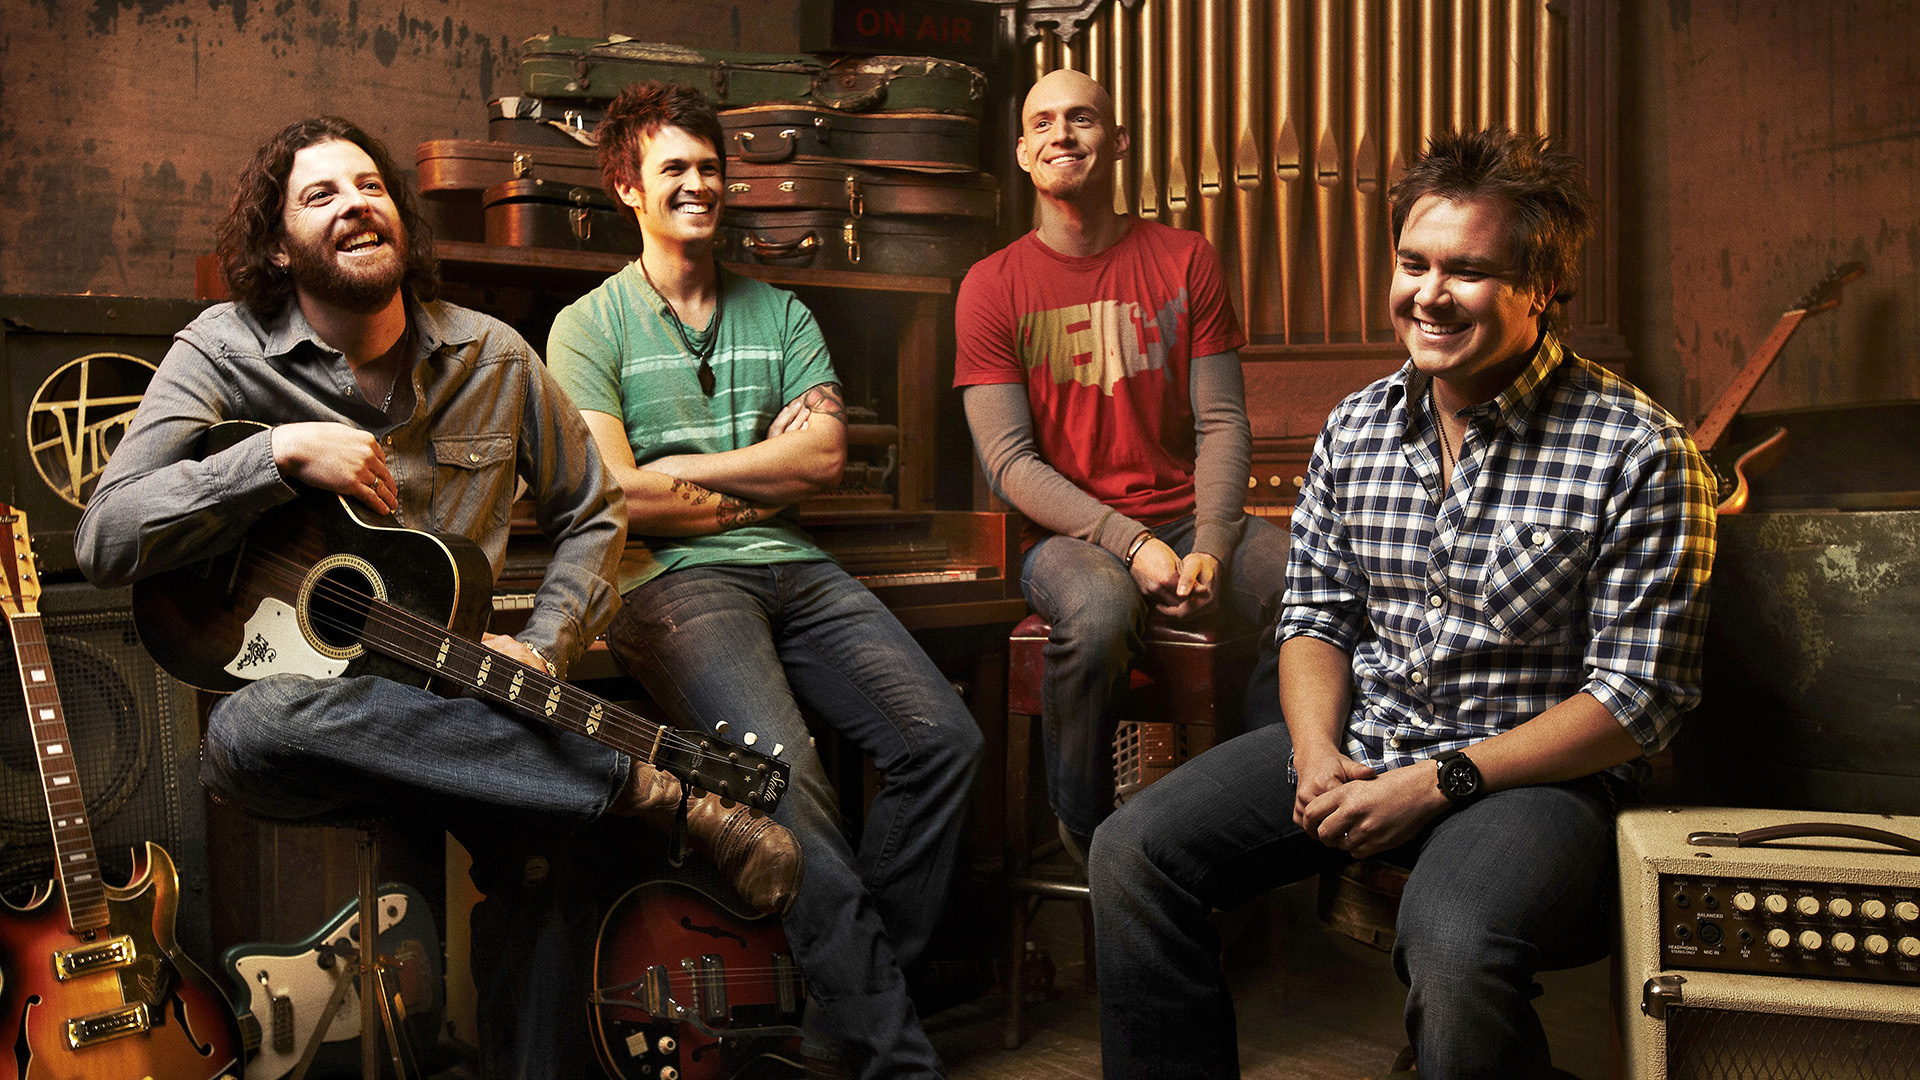 Eli Young Band, Music fan art, Country music band, Creative expression, 1920x1080 Full HD Desktop